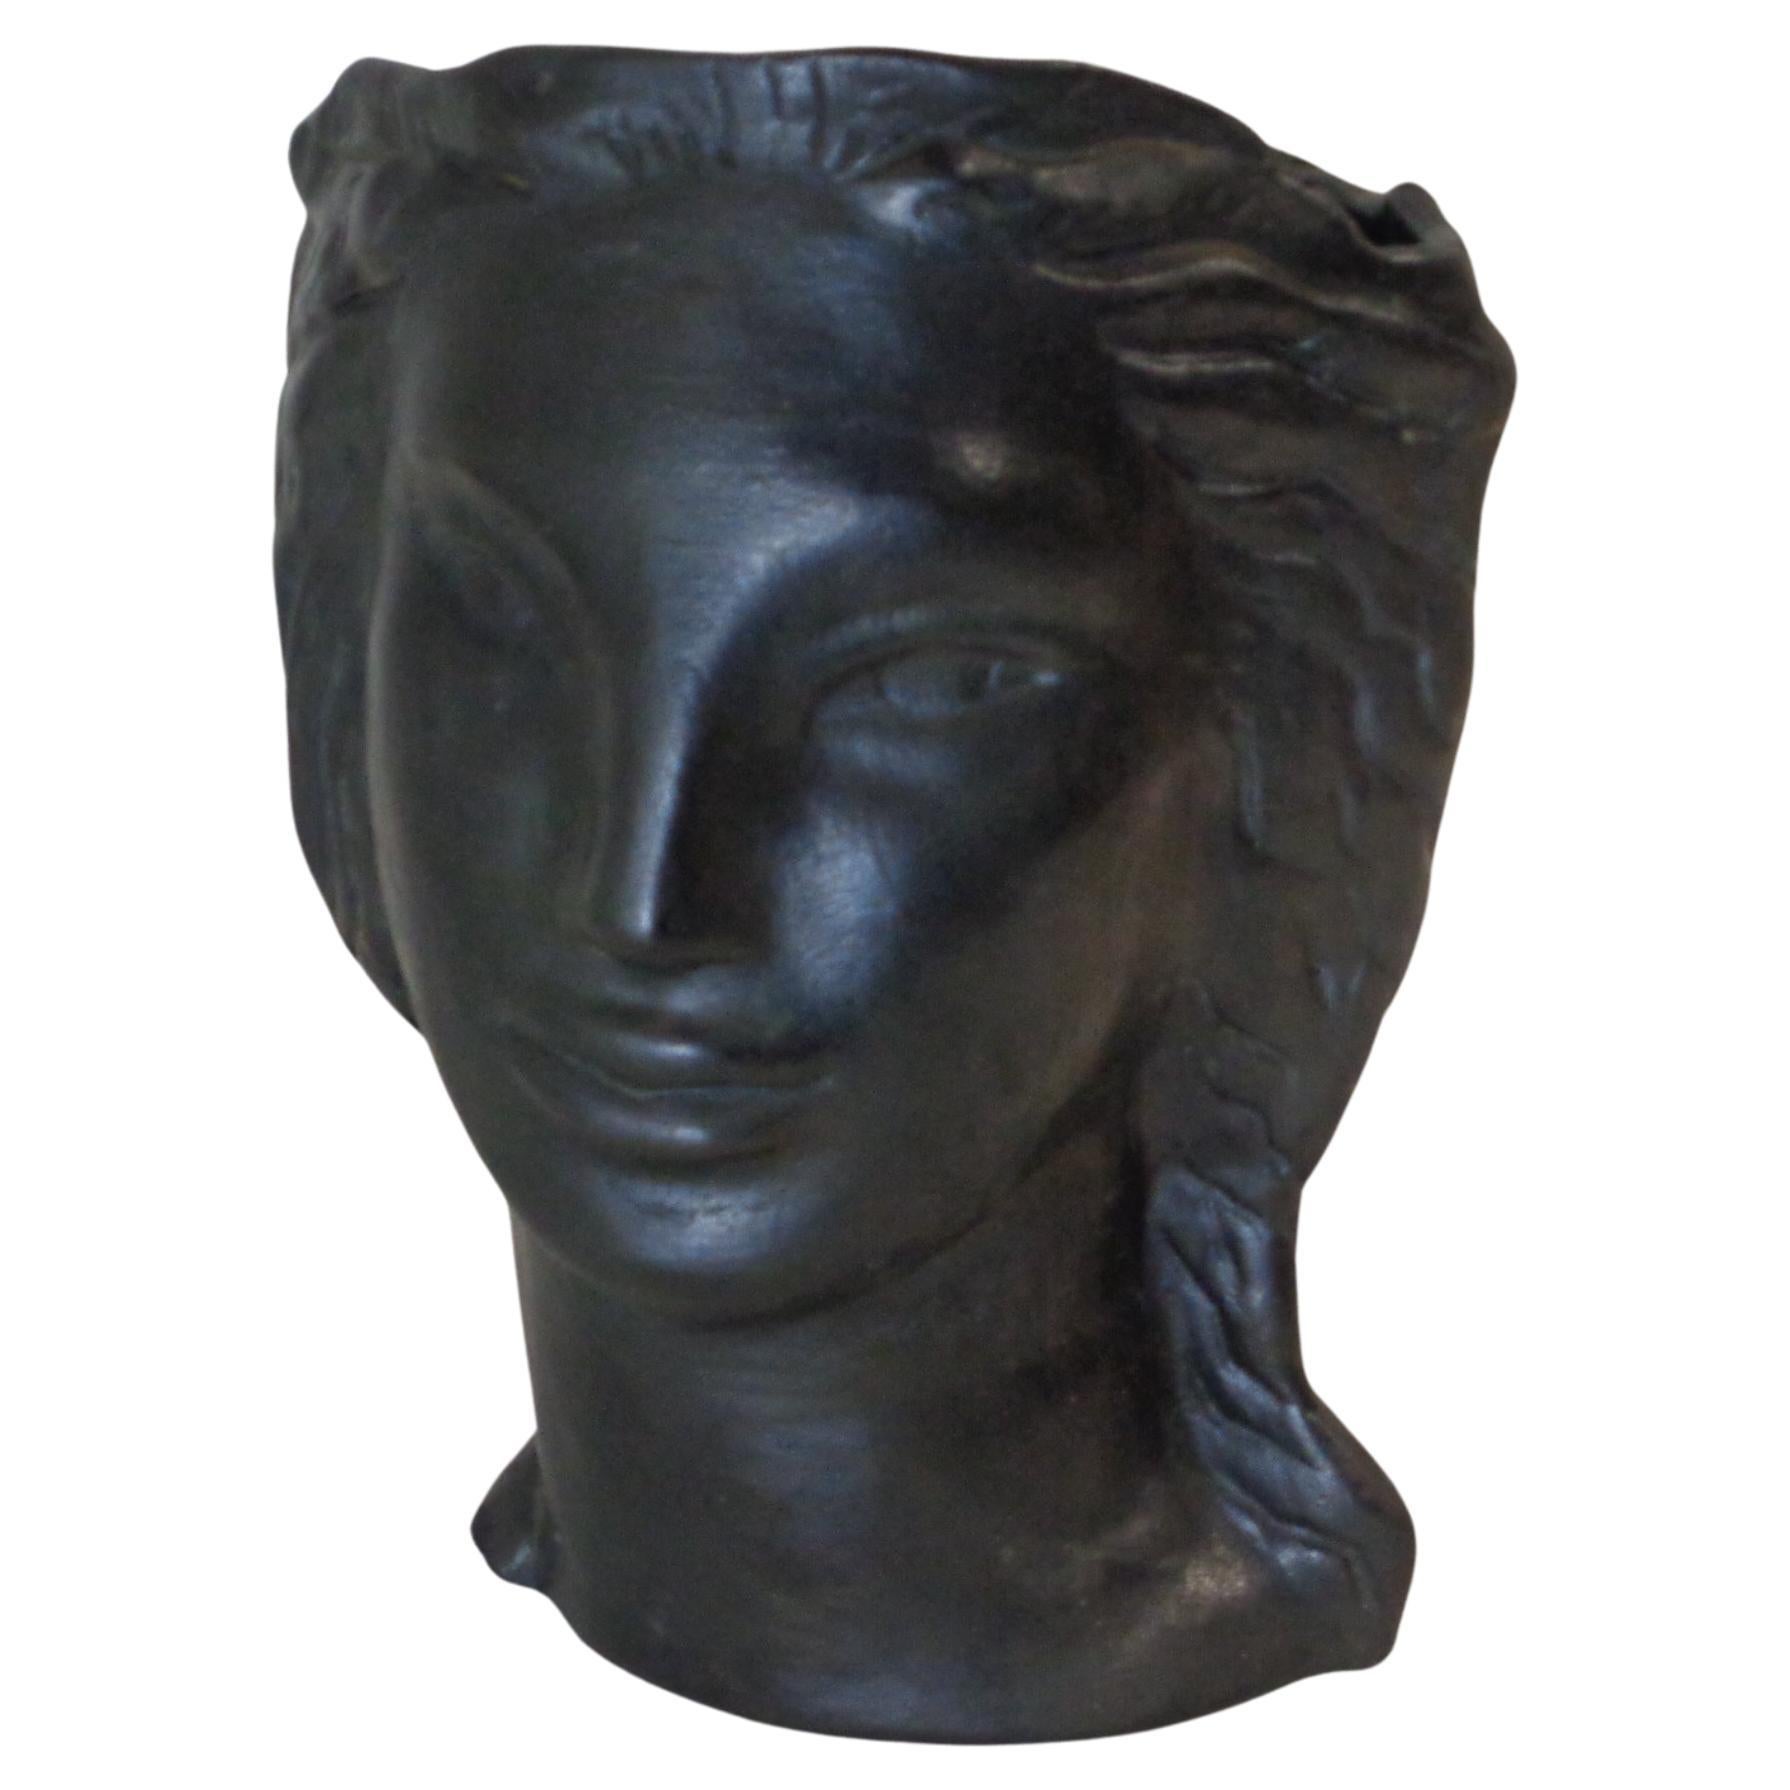 American Art Deco exotic head vase sculpture in the style of Jean Cocteau - hand sculpted ceramic in a metallic graphite black glaze w/ rich blue interior glaze - hand signed and titled on bottom - Cockcroft - Antique Fragment / incise signed lower